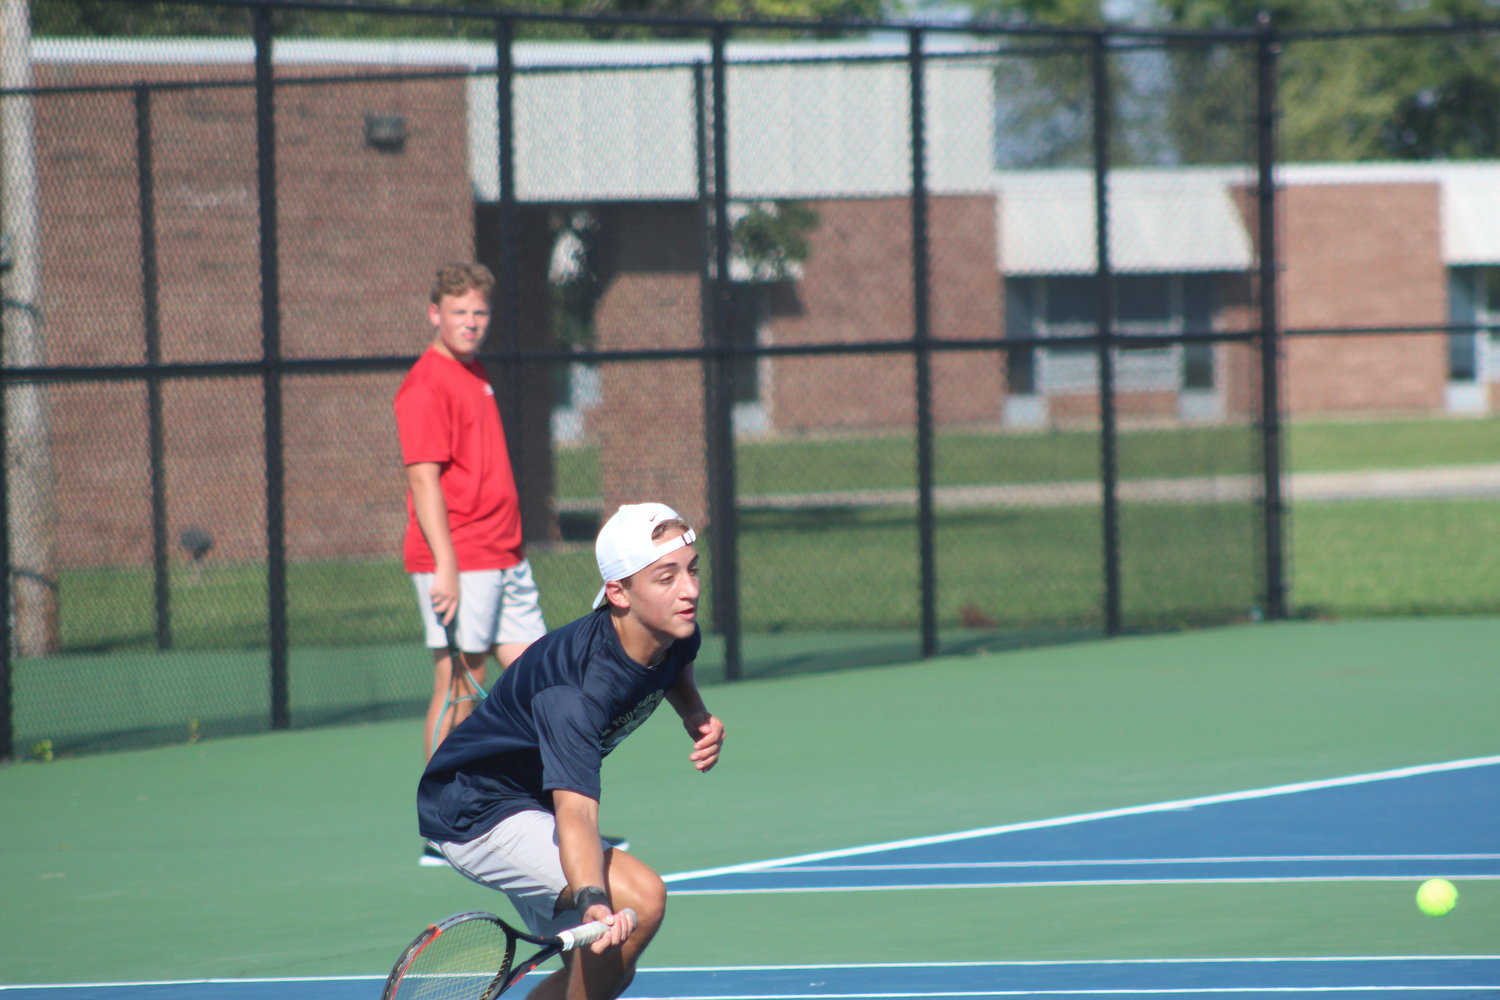 Sophomore Gabe McCollum sealed the Mustang win over Southmont on Monday with a three-set win at two singles.